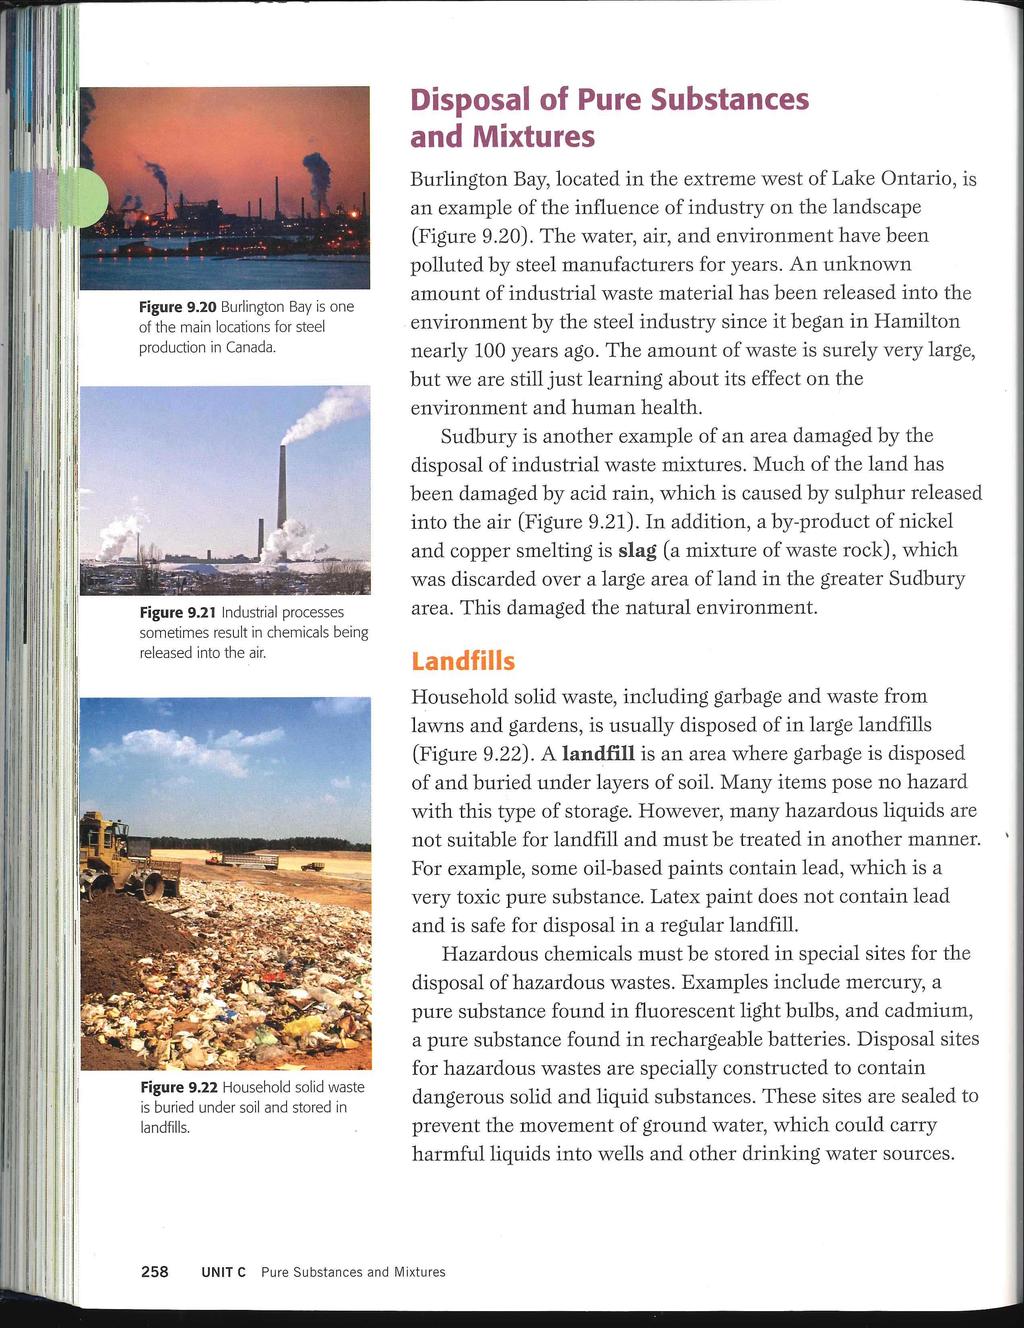 Disposal of Pure Substances and Mixtures Figure 9.20 Burlington Bay is one of the main locations for steel production in Canada. Figure 9.21 Industrial processes sometimes result in chemicals being released into the air.